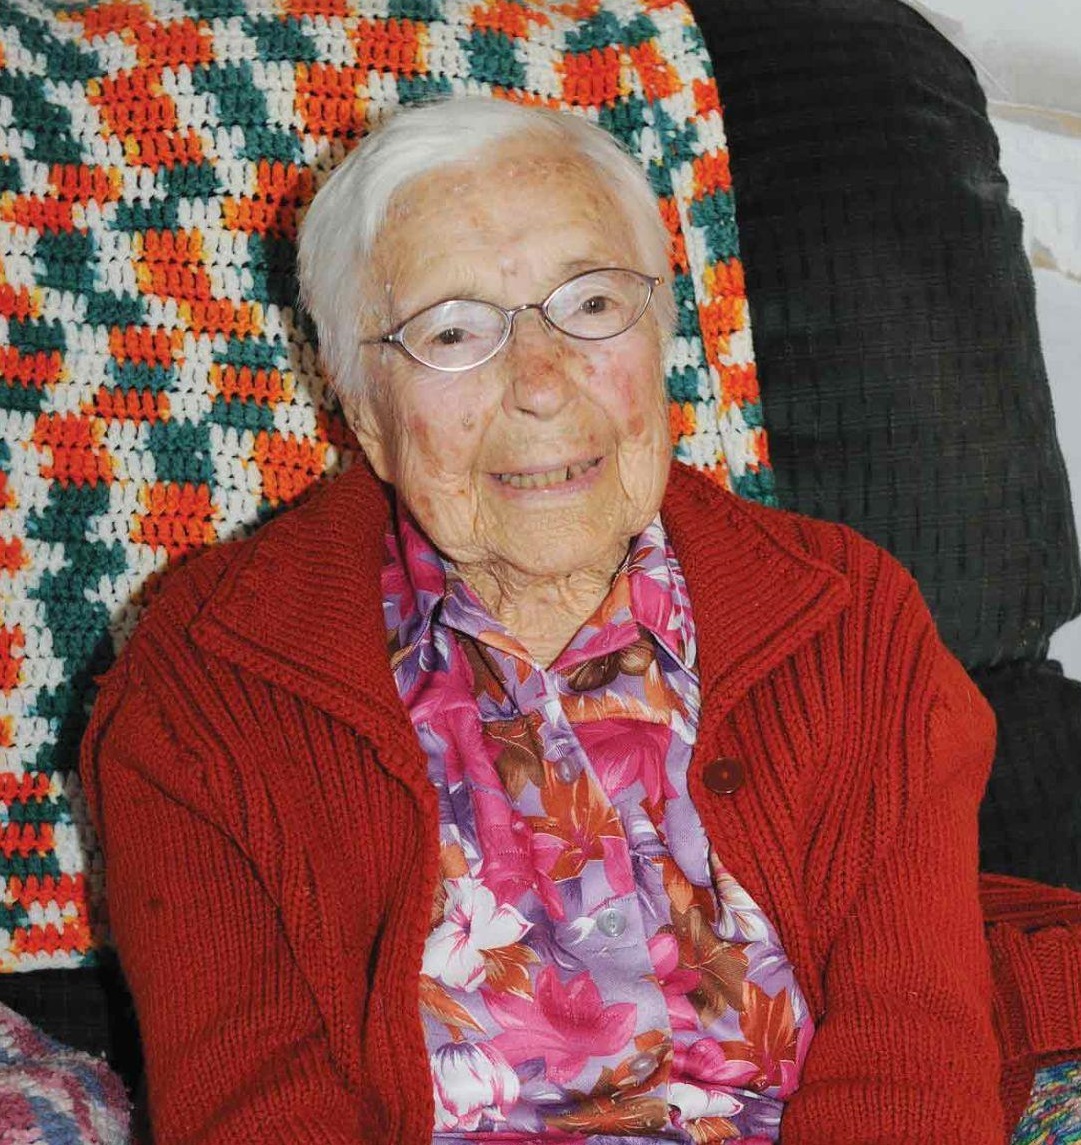 On her 109th birthday in 2014. (Source: Wood River Chapel)